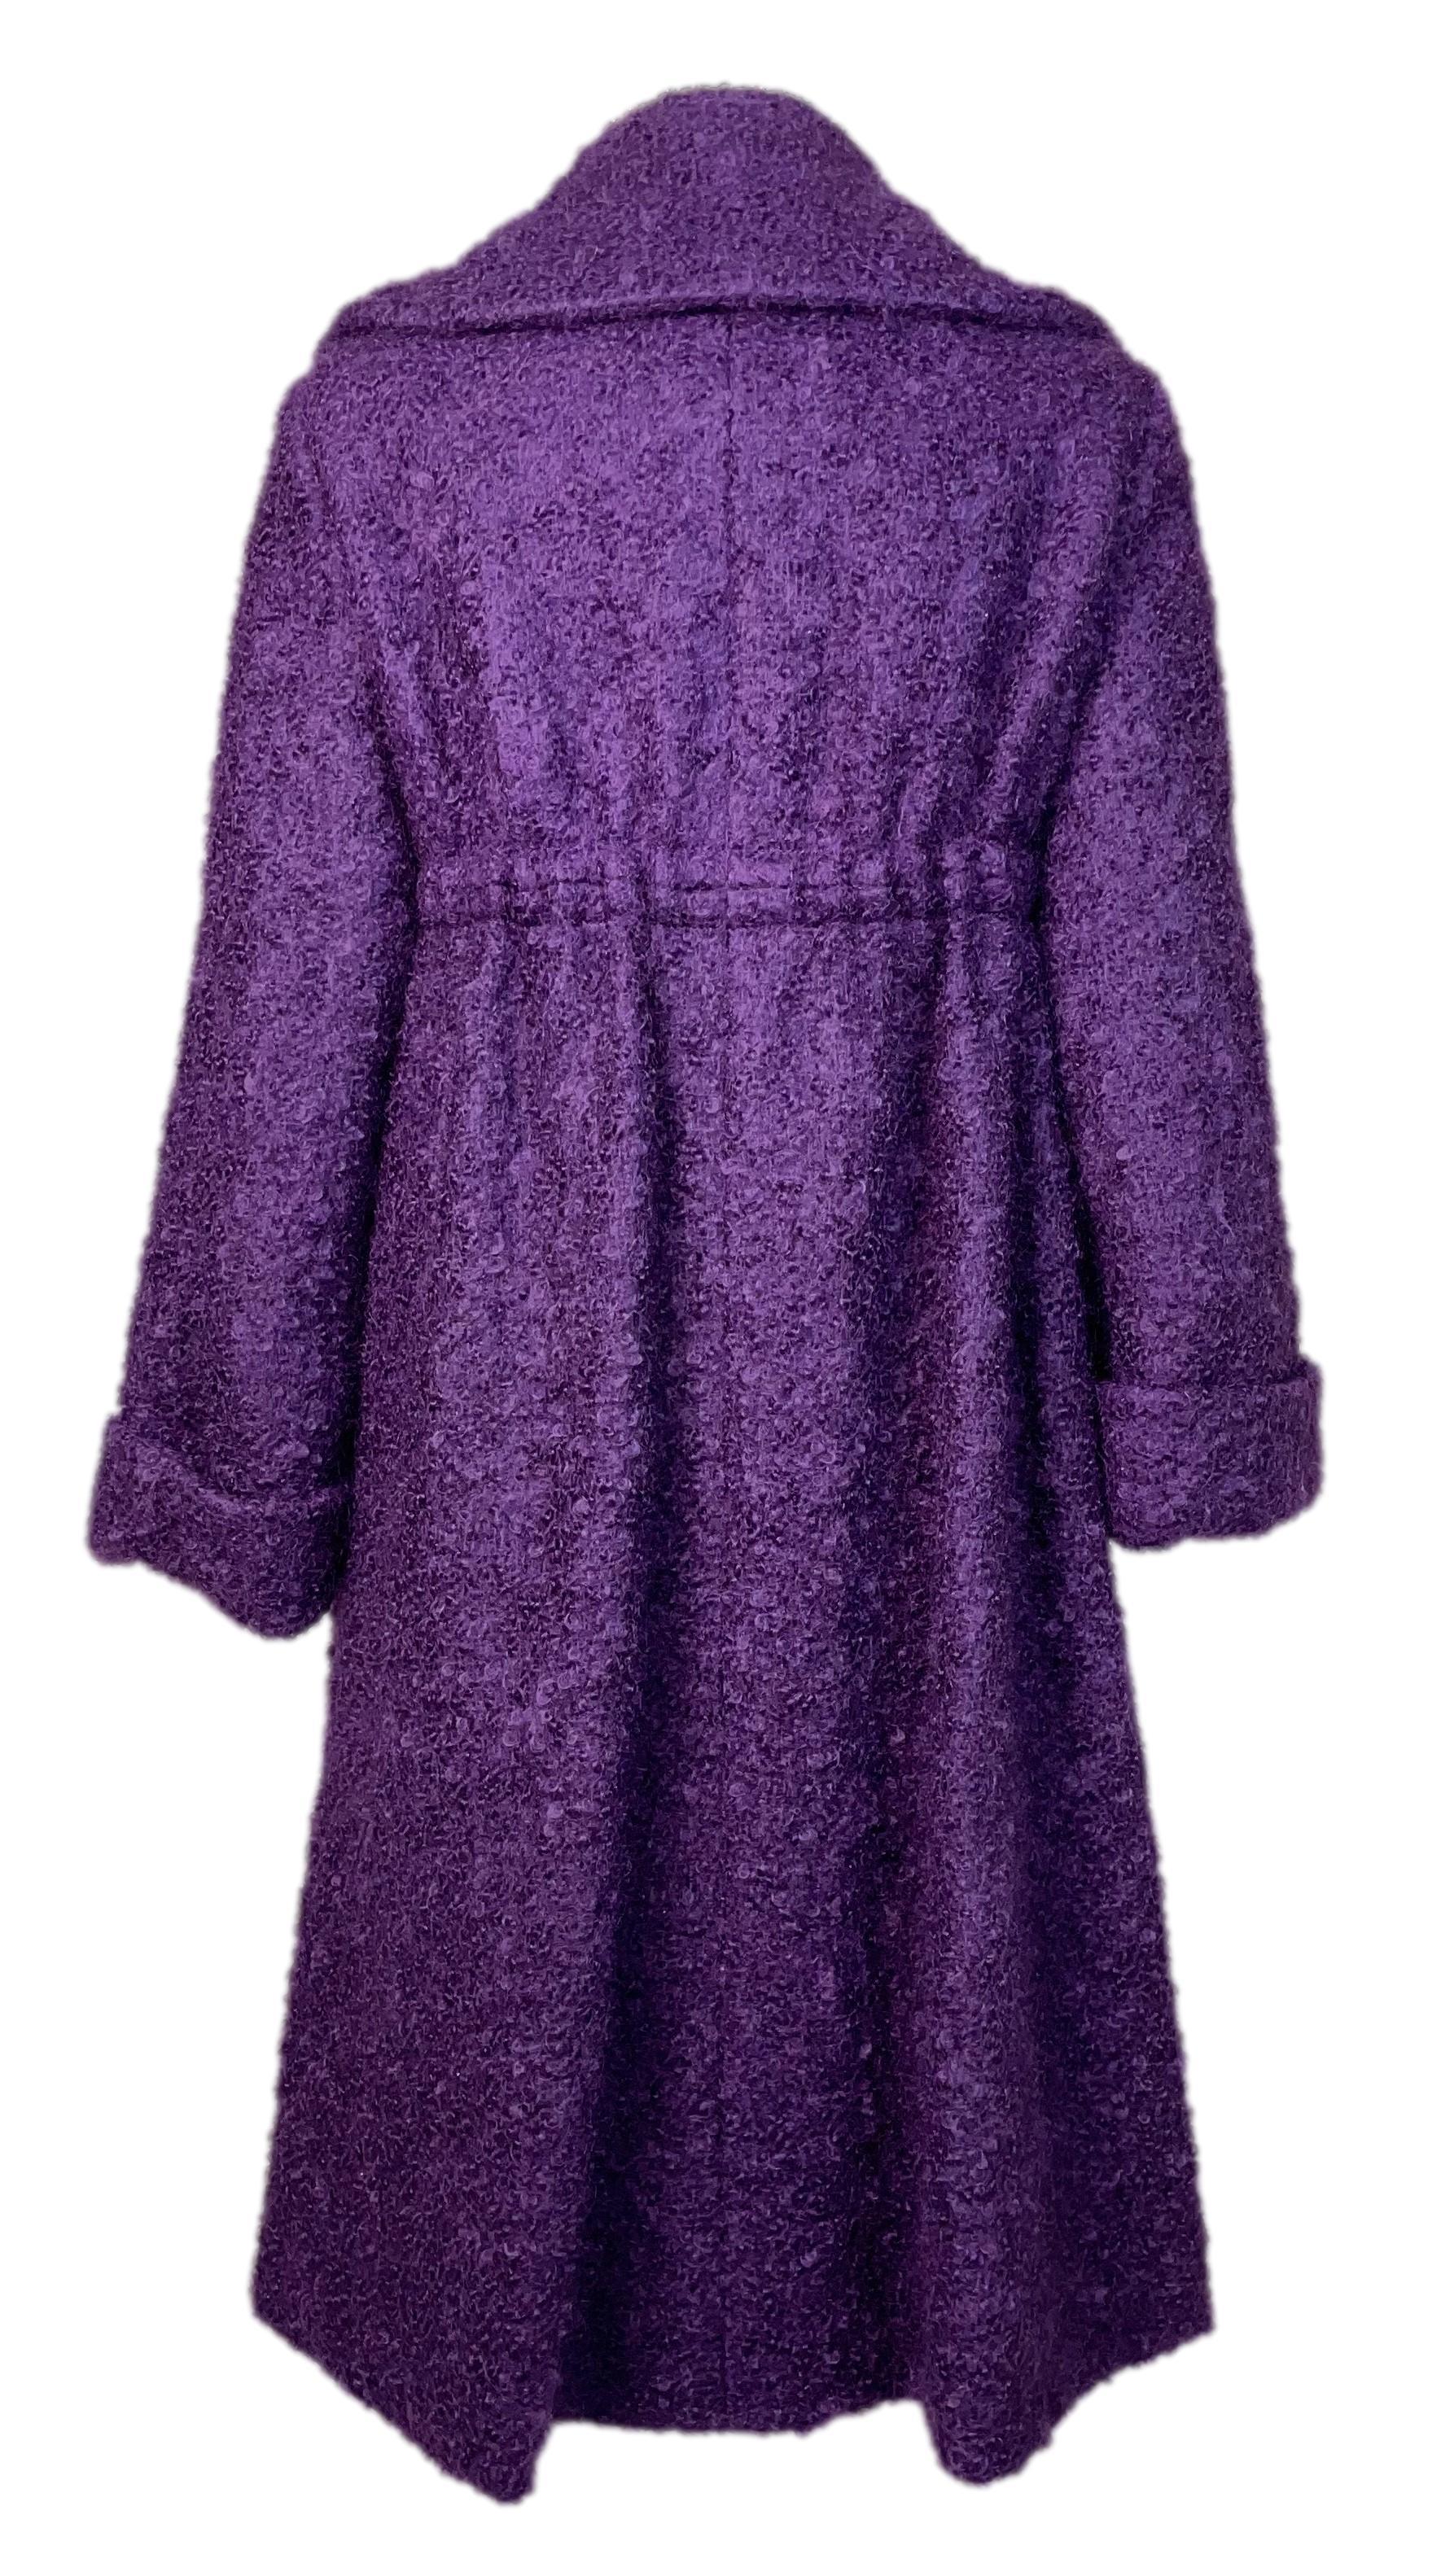 F/W 2009 Christian Dior by John Galliano Haute Couture 1960's Style Purple Coat In Excellent Condition For Sale In Yukon, OK